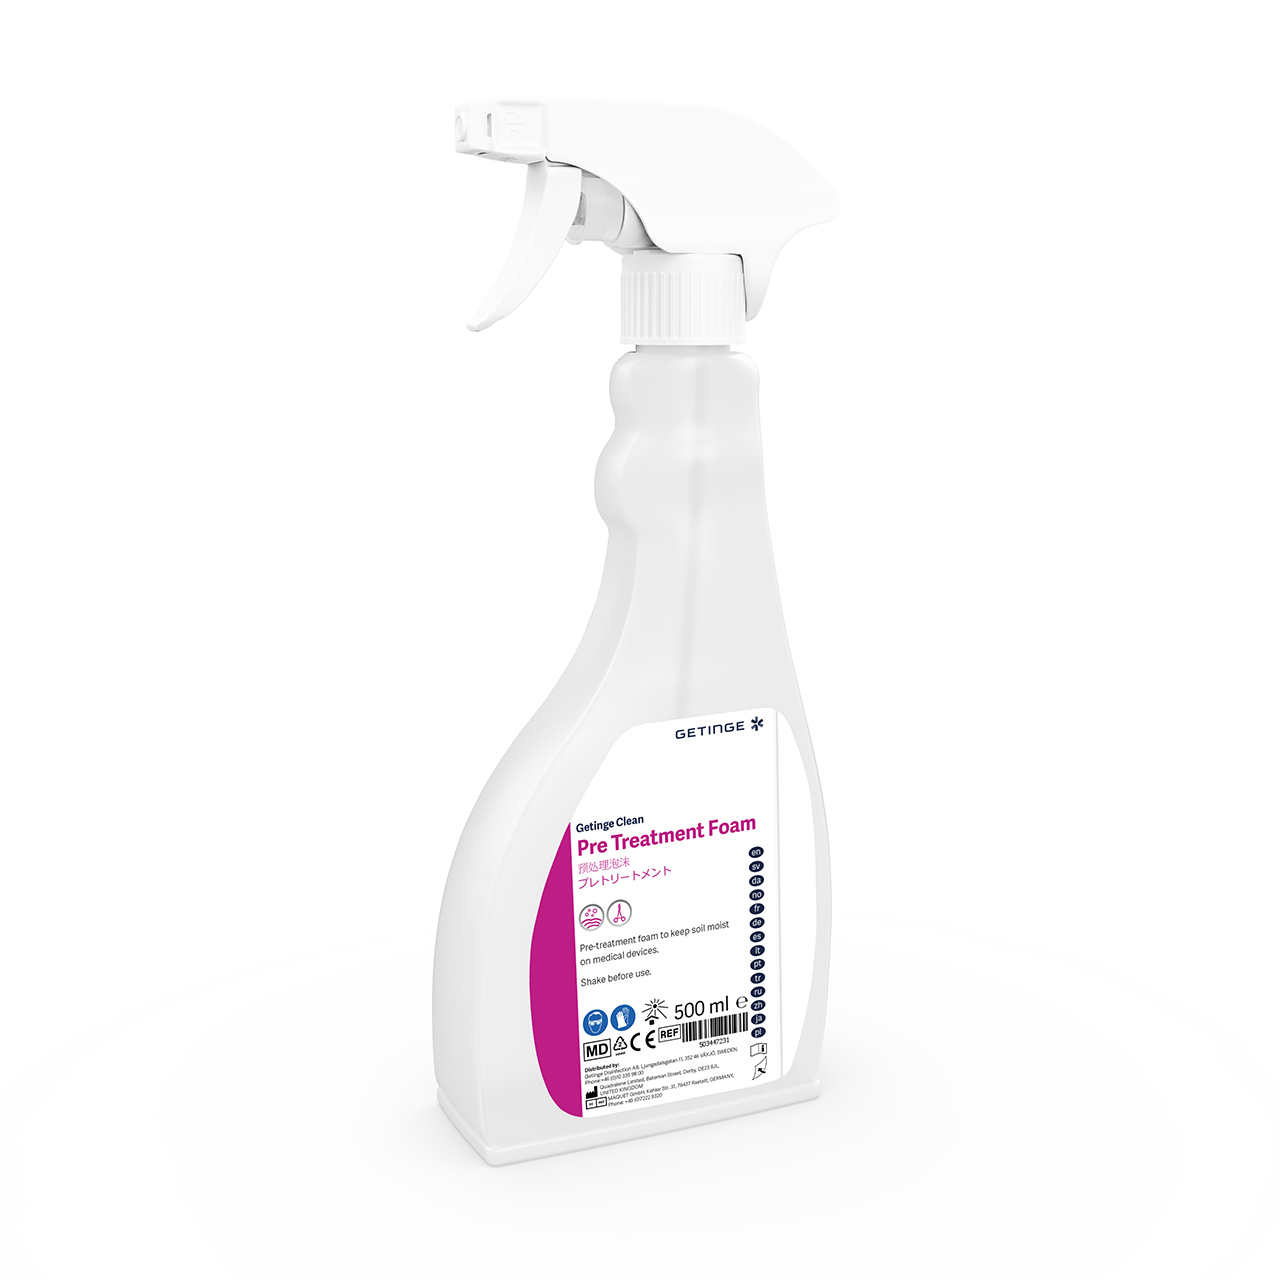 Getinge Clean Foam Spray is available in ready to use 500 ml hand held dispensers